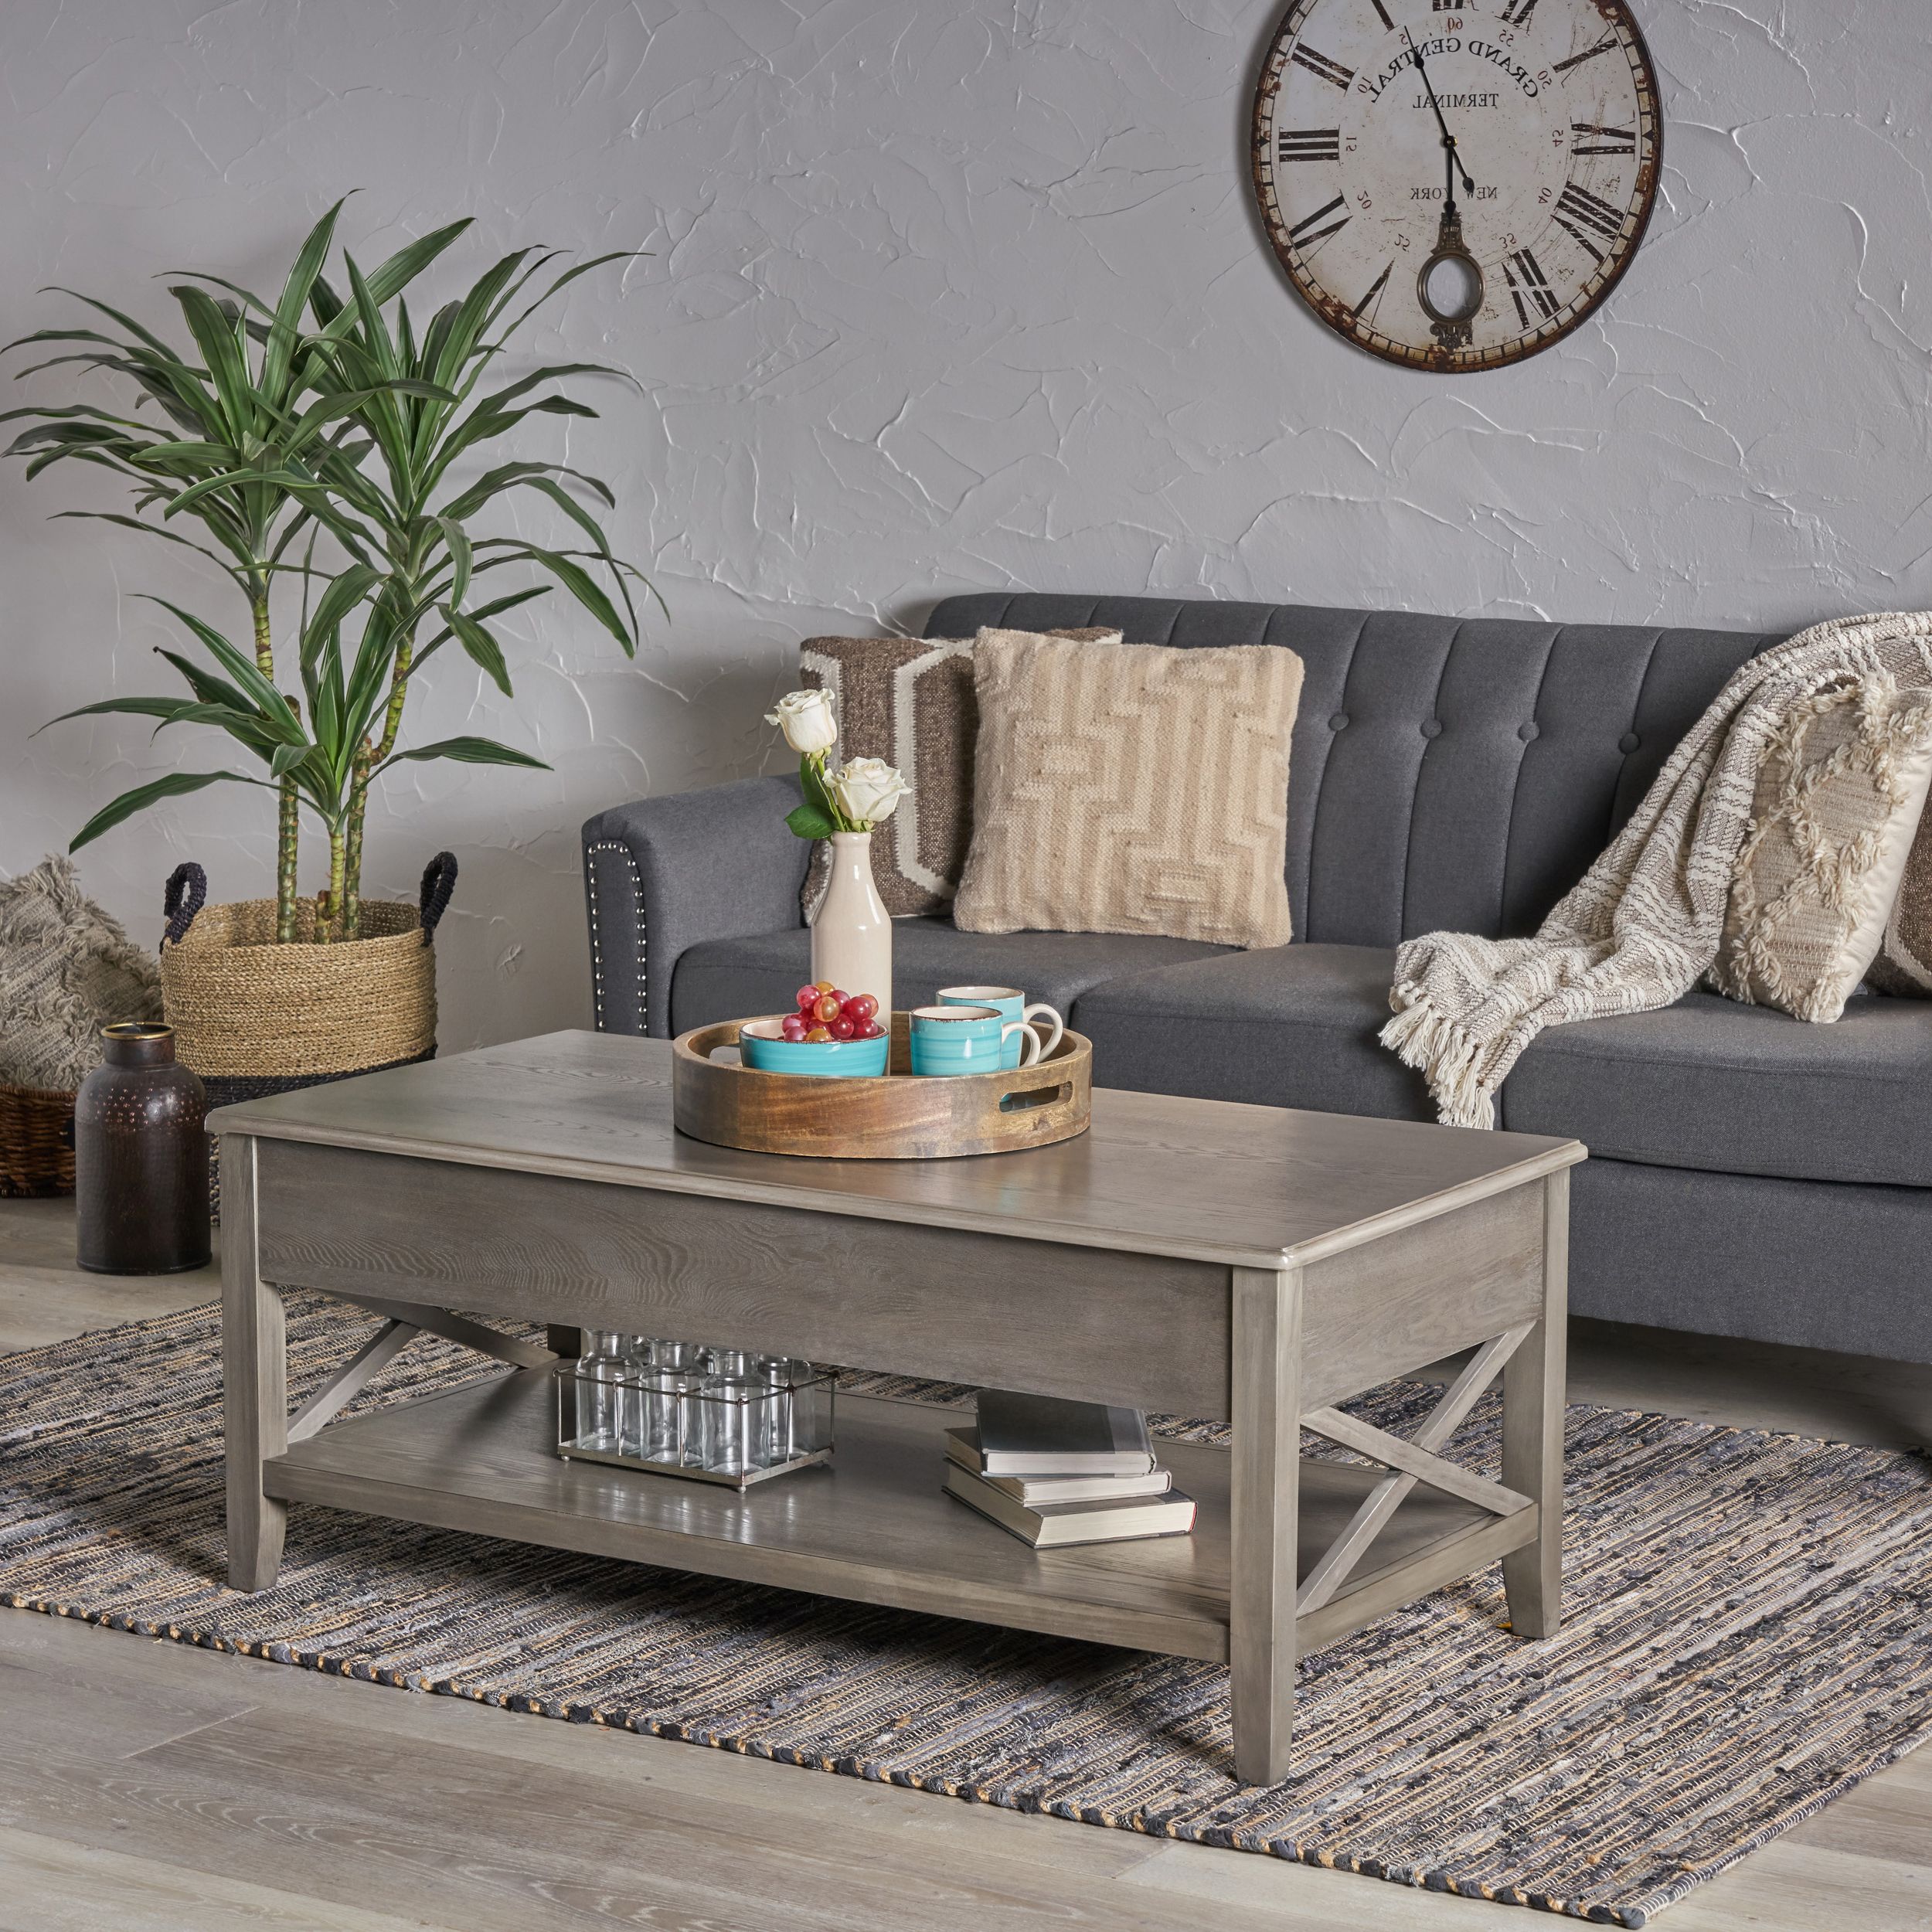 Popular Laurel Luke Farmhouse Faux Wood Lift Top Coffee Table With Regard To Gray Driftwood And Metal Coffee Tables (View 5 of 20)